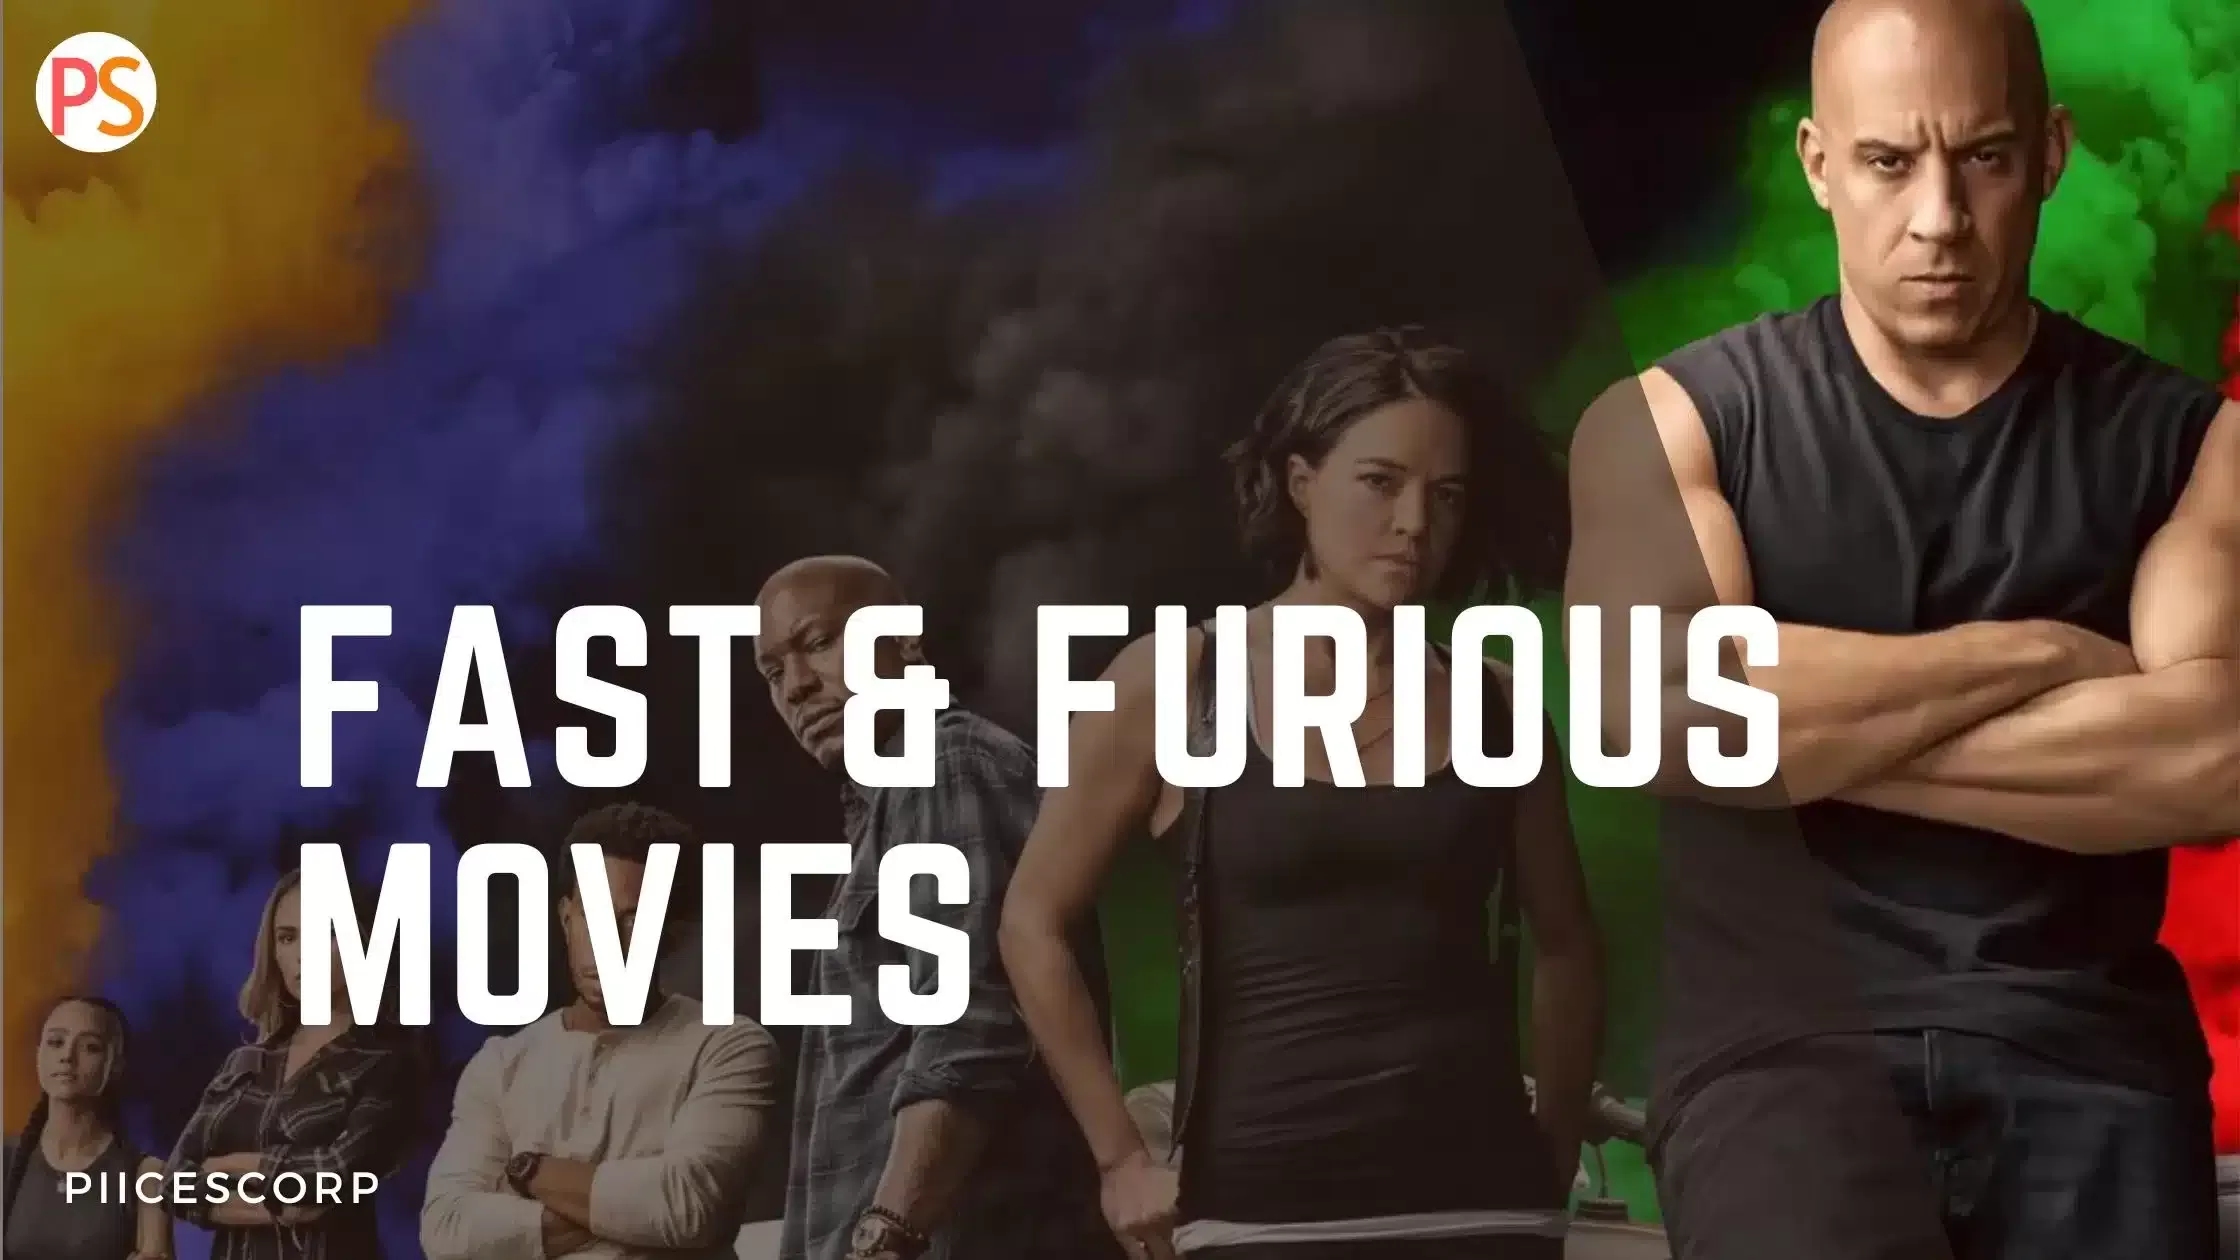 Fast & Furious Movies